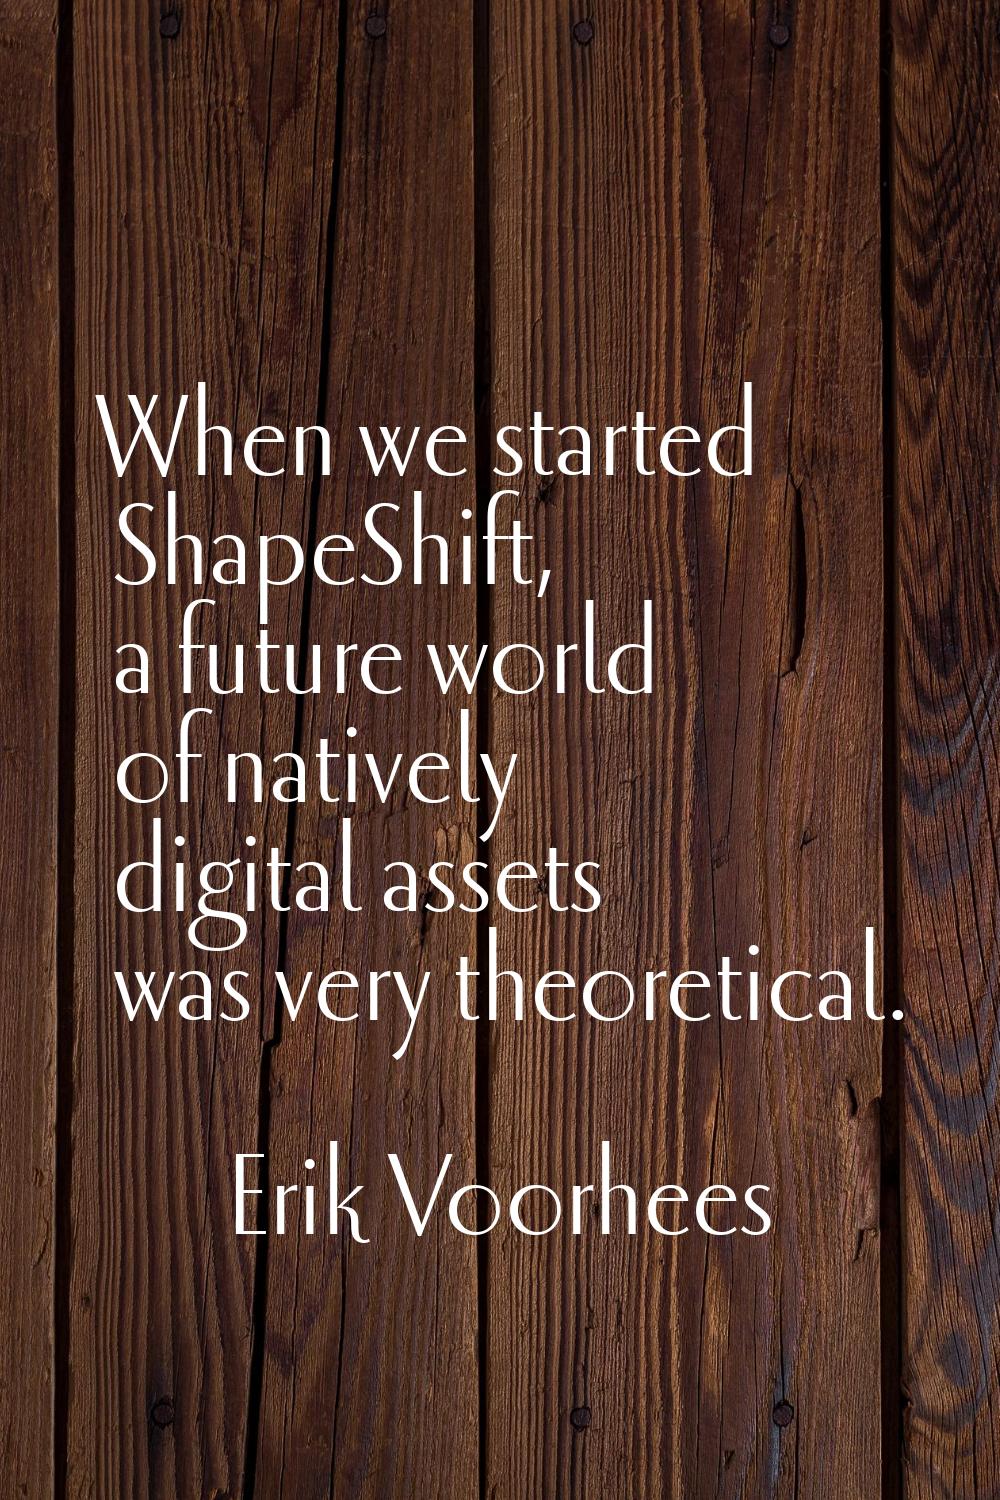 When we started ShapeShift, a future world of natively digital assets was very theoretical.